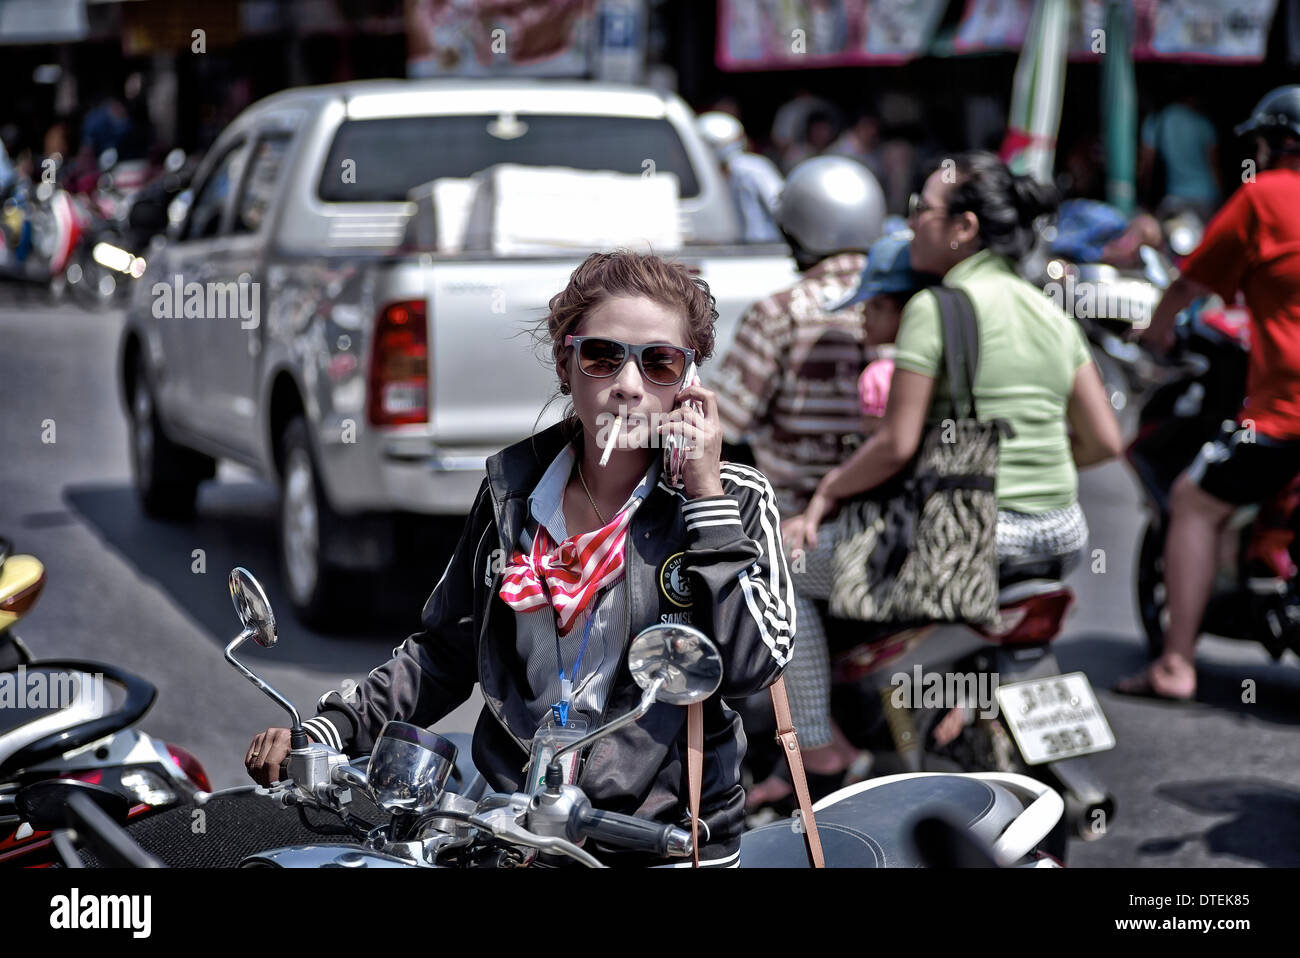 Woman smoking a cigarette and using a mobile phone whilst preparing to ride her motorcycle. Thailand S. E. Asia Stock Photo